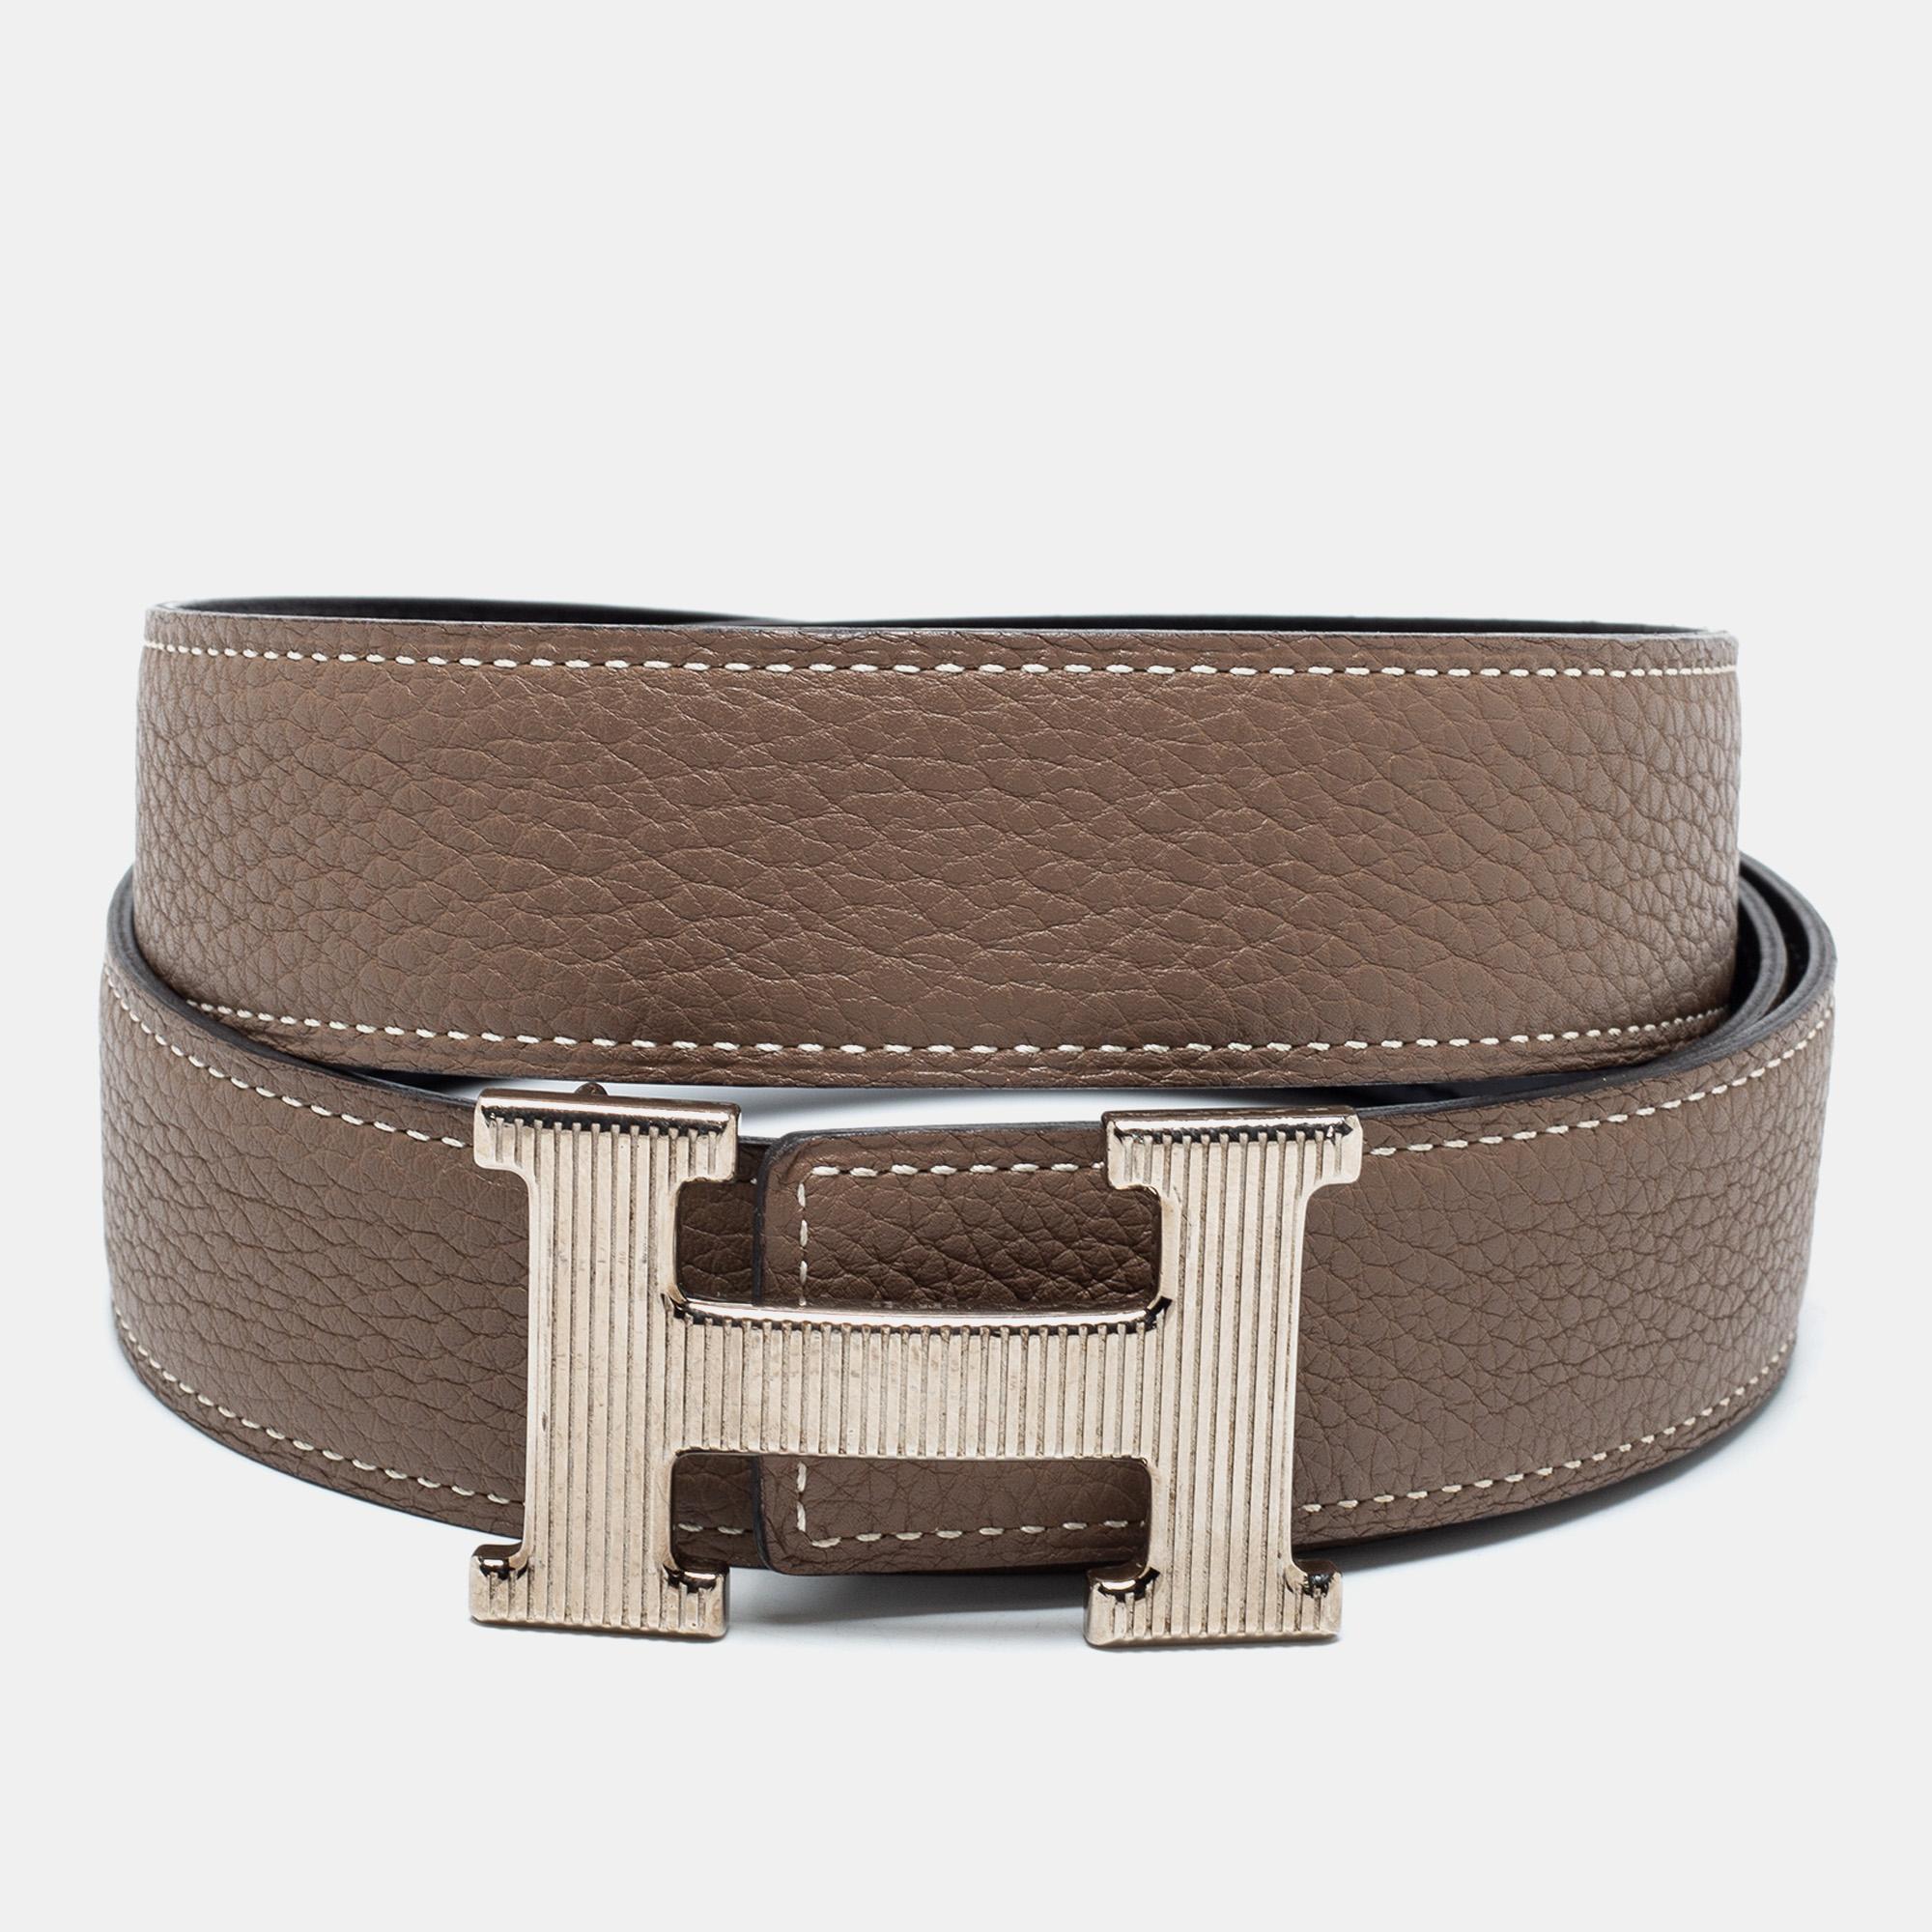 This Hermes reversible belt is crafted from Chamonix and Togo leather. The classic piece has dual shades to match a variety of outfits. It is completed with a silver-tone H buckle.

Includes: Original Box
